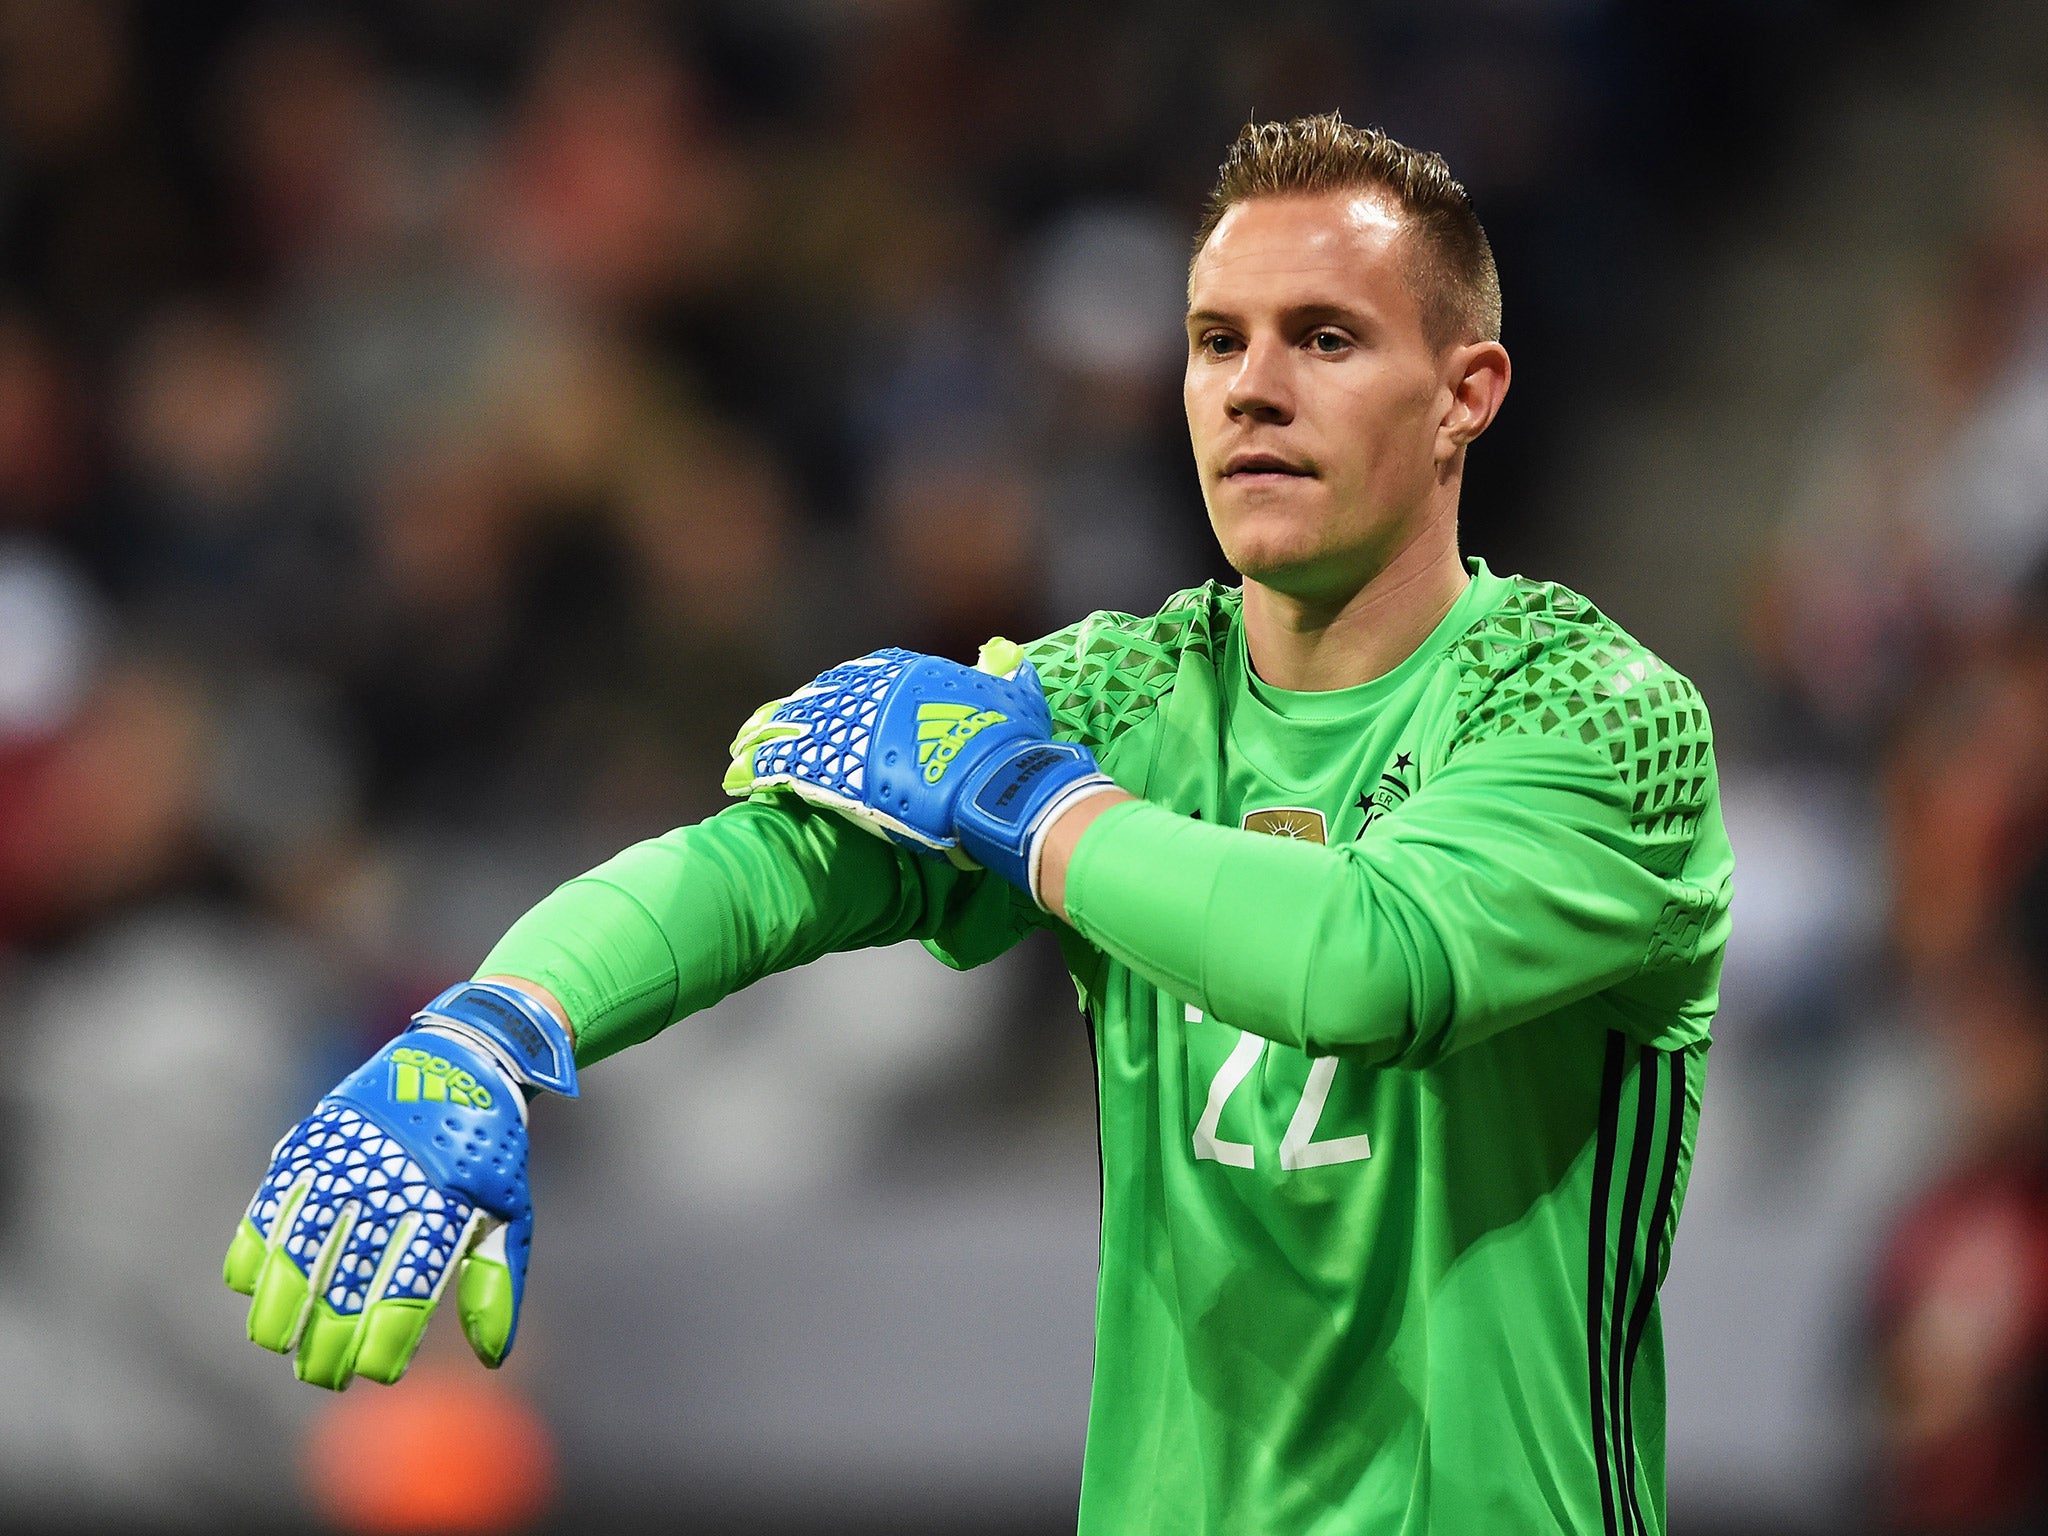 Marc-Andre ter Stegen is believed to be close to joining Manchester City